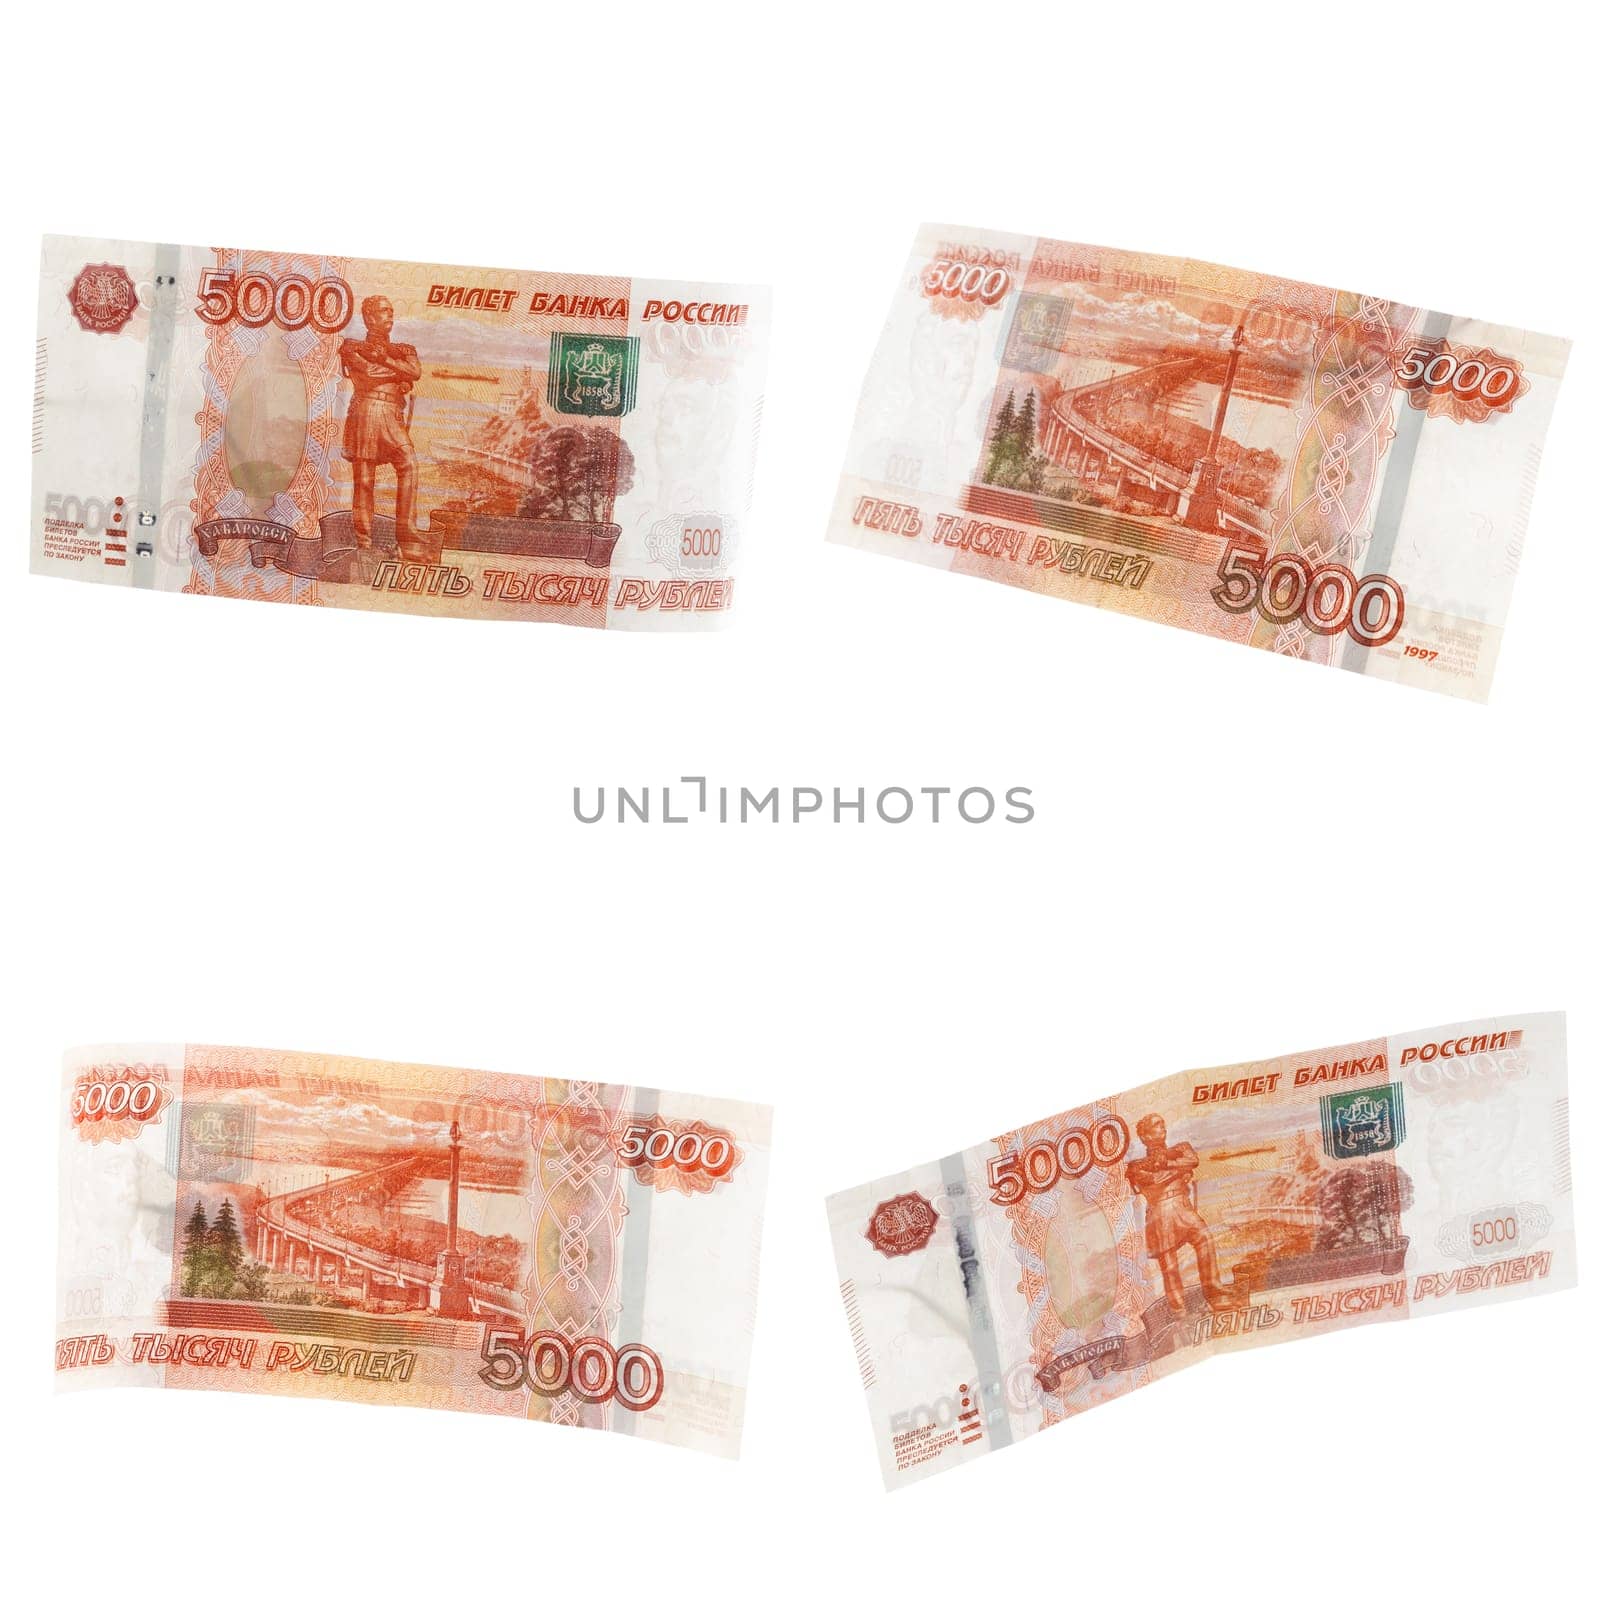 Banknotes of 5000 Russian rubles collage isolated on white background by Fabrikasimf